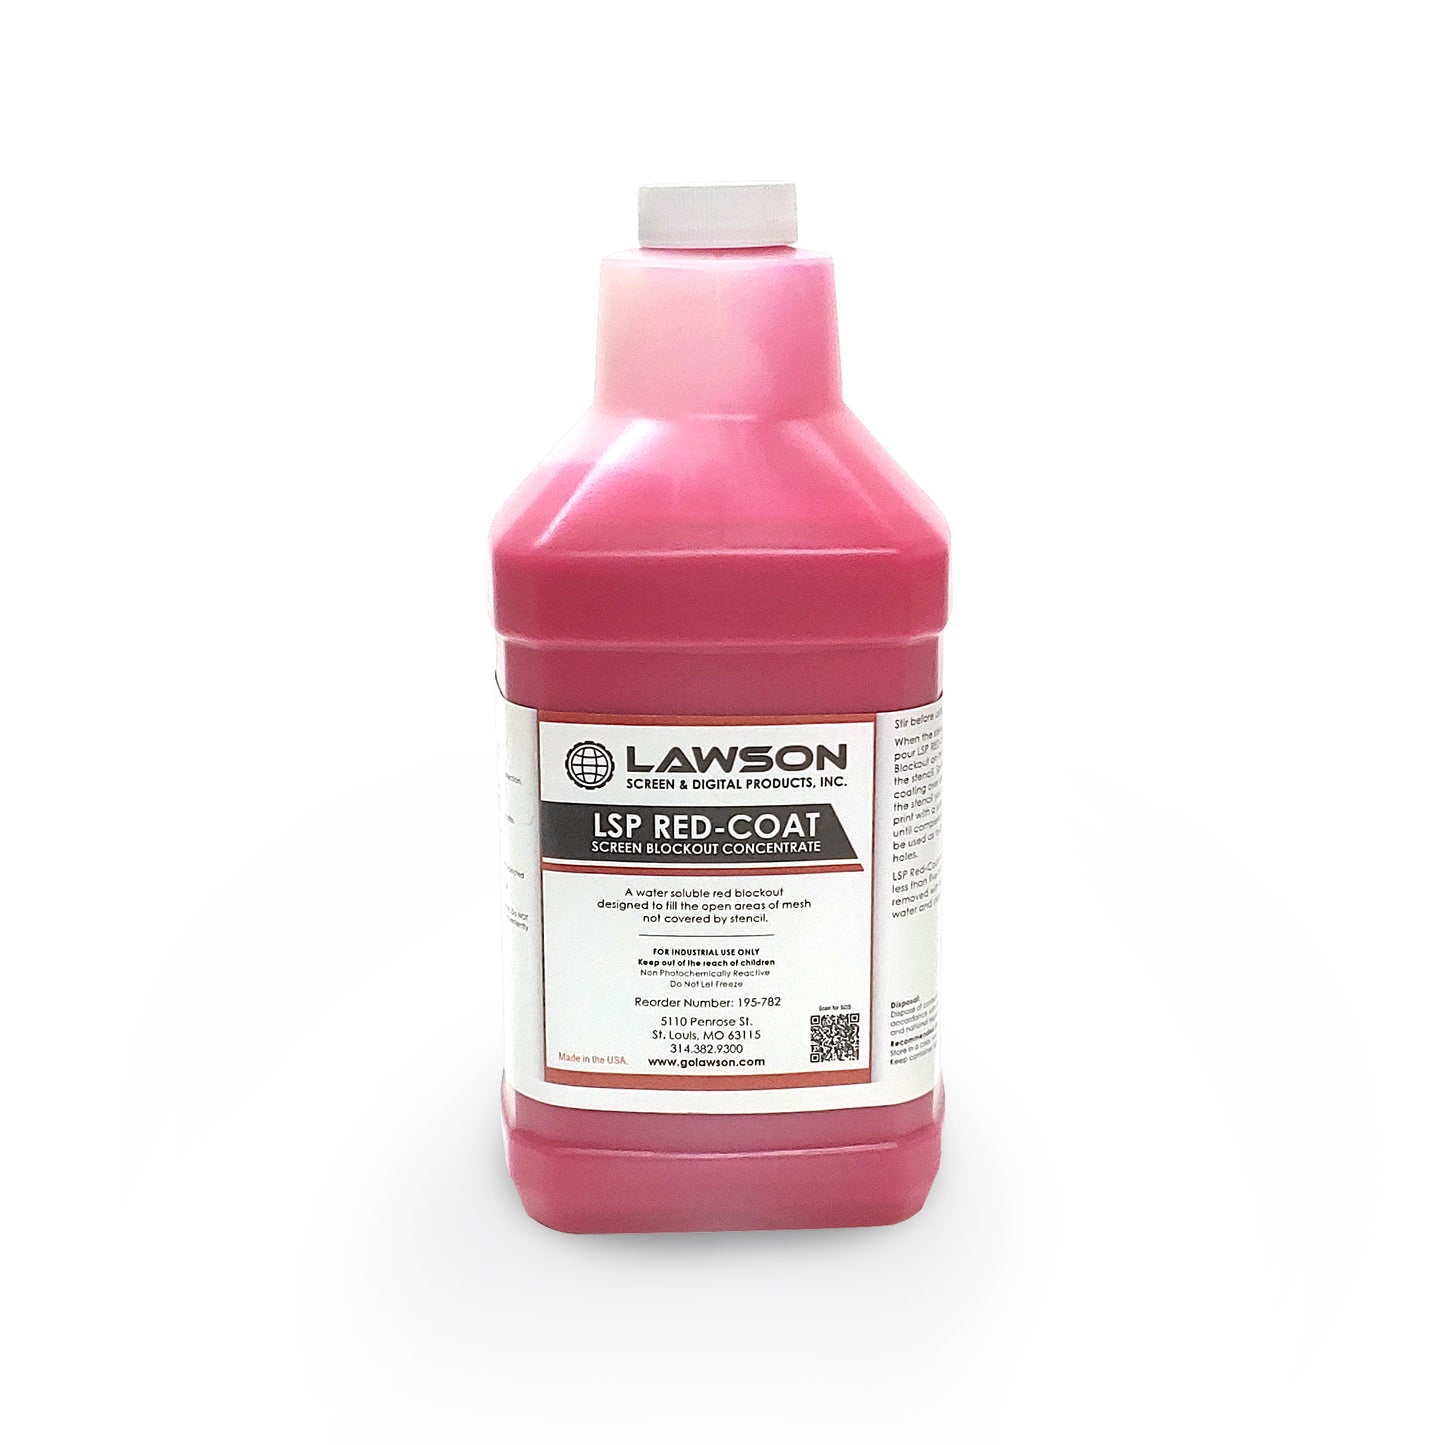 Lawson Red Coat Screen Mesh Blockout-Pre-Press Chemicals-Lawson Screen & Digital Products Lawson Screen & Digital Products dtf printer screen printing direct to fabric equipment machine printers equipment dtg printer screen printing direct to garment equipment machine printers